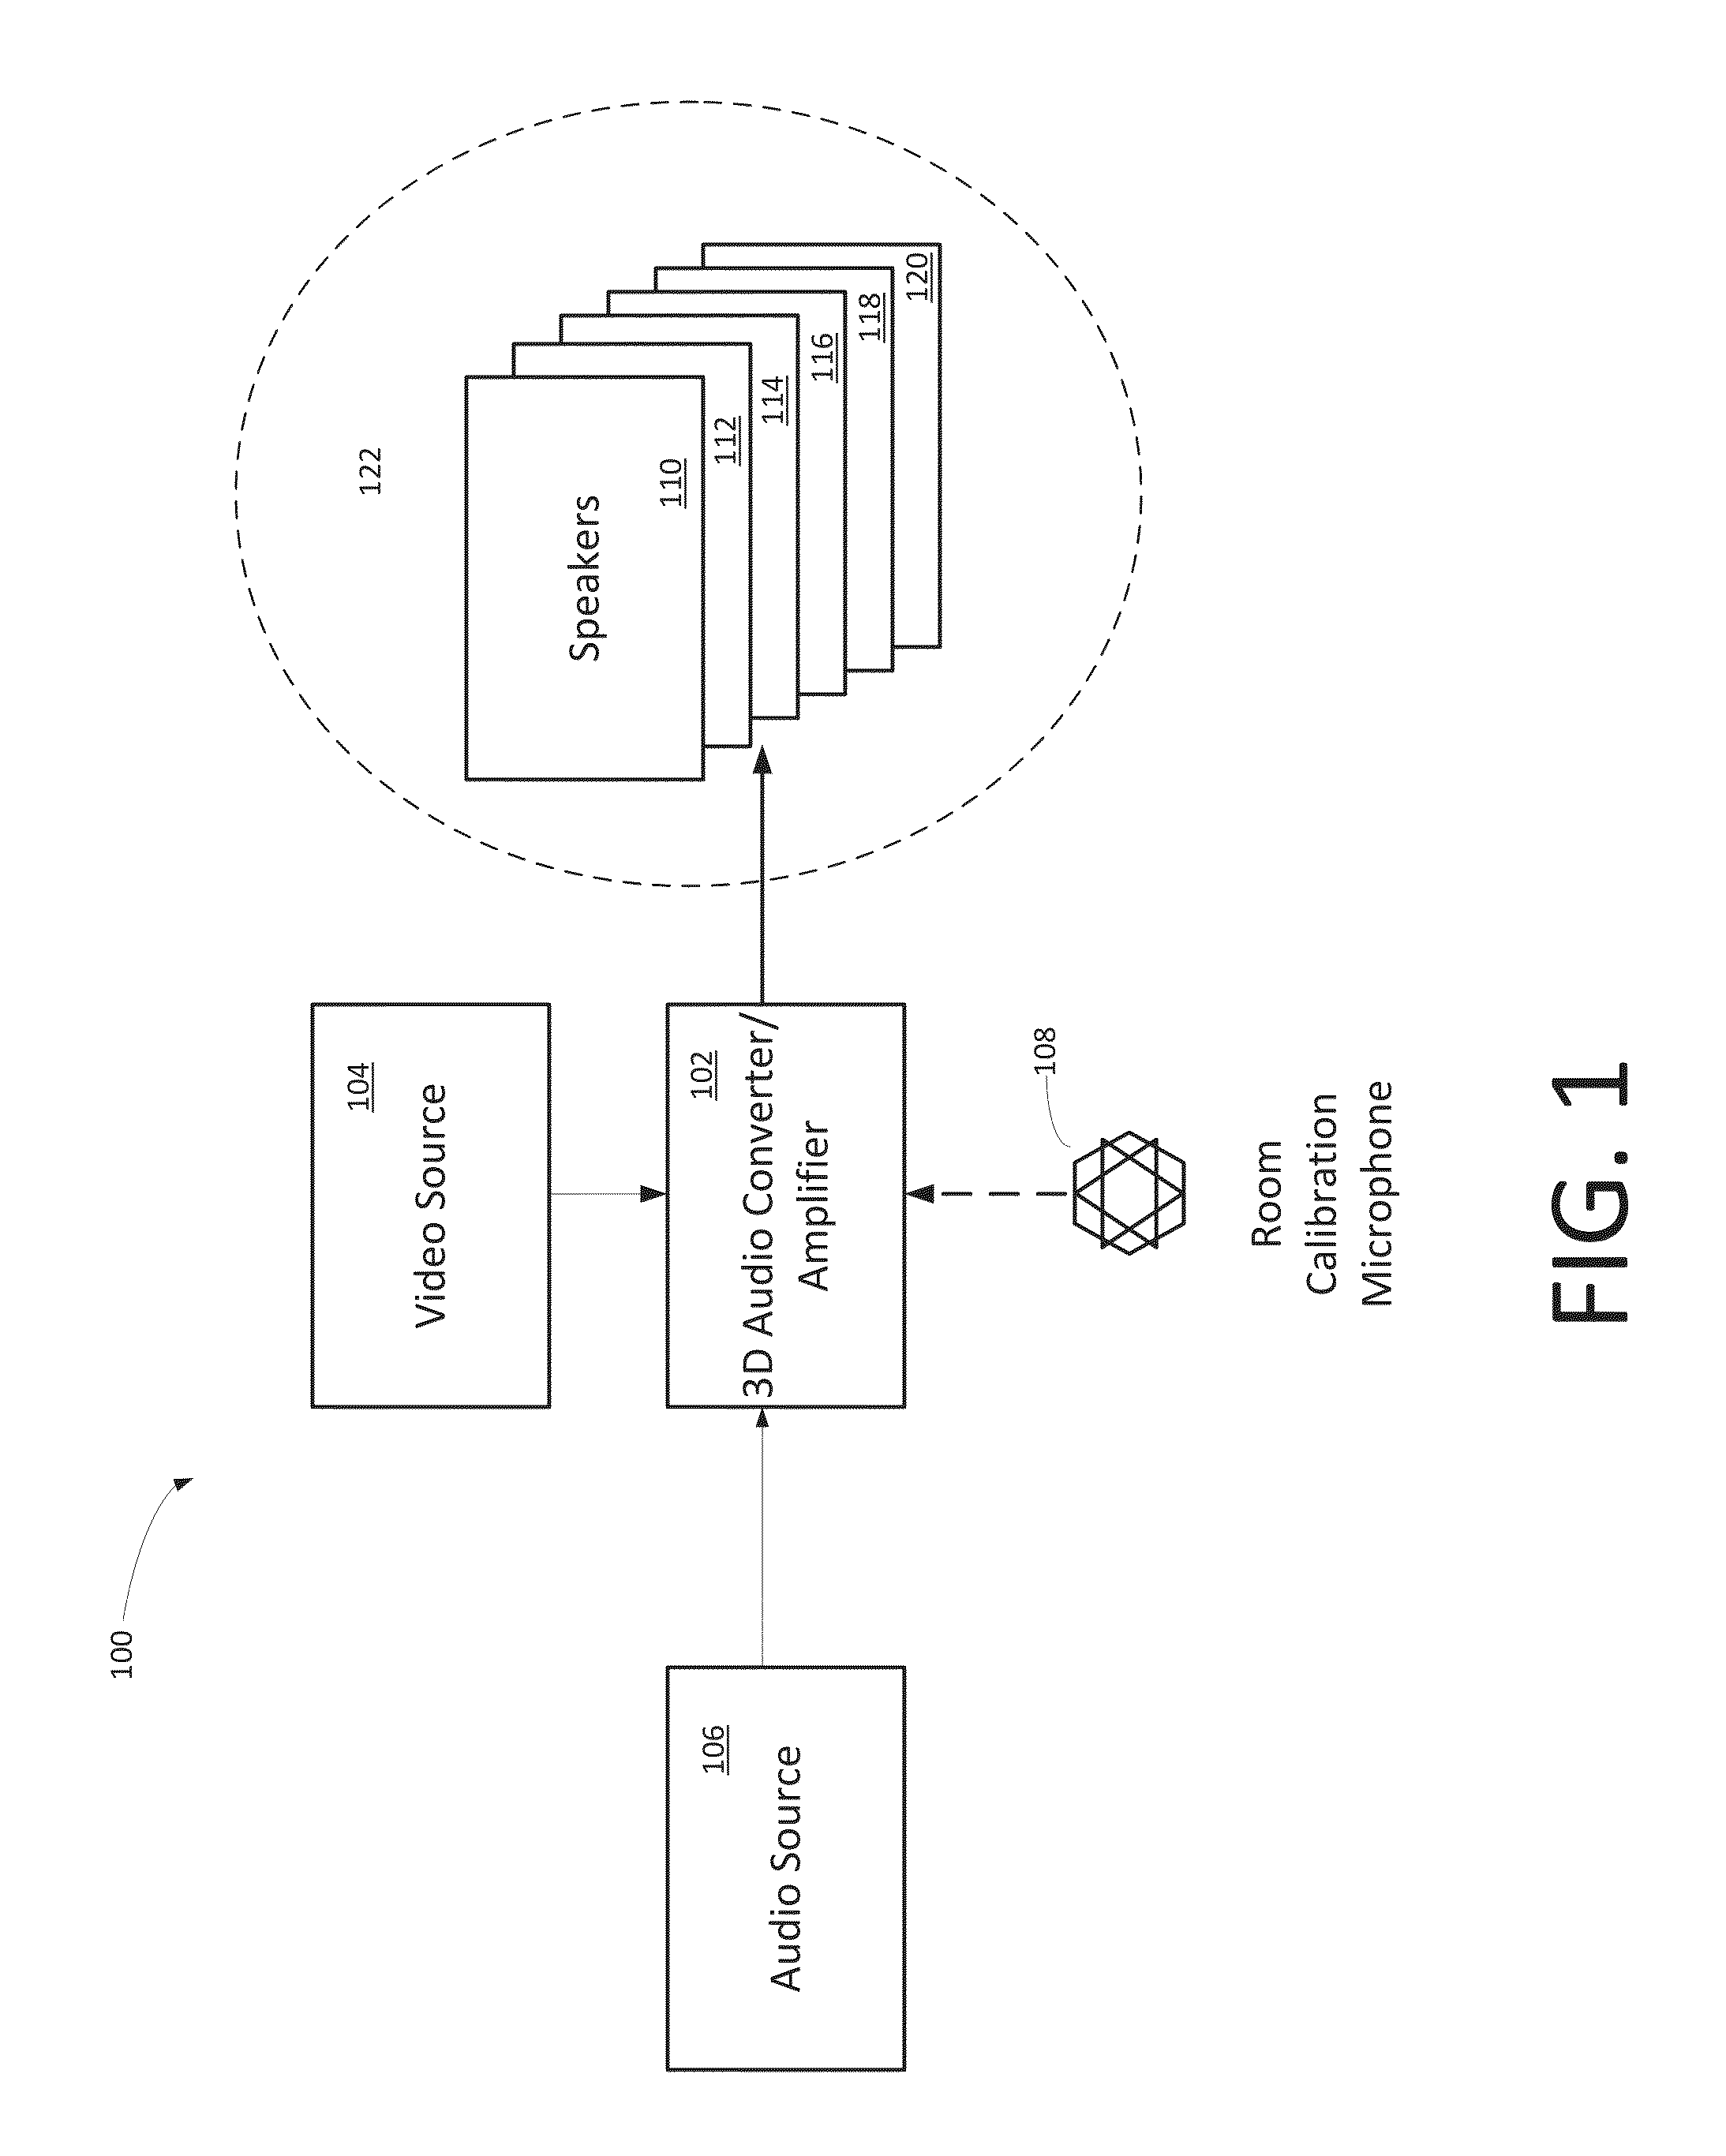 Systems, Methods, and Apparatus for Playback of Three-Dimensional Audio